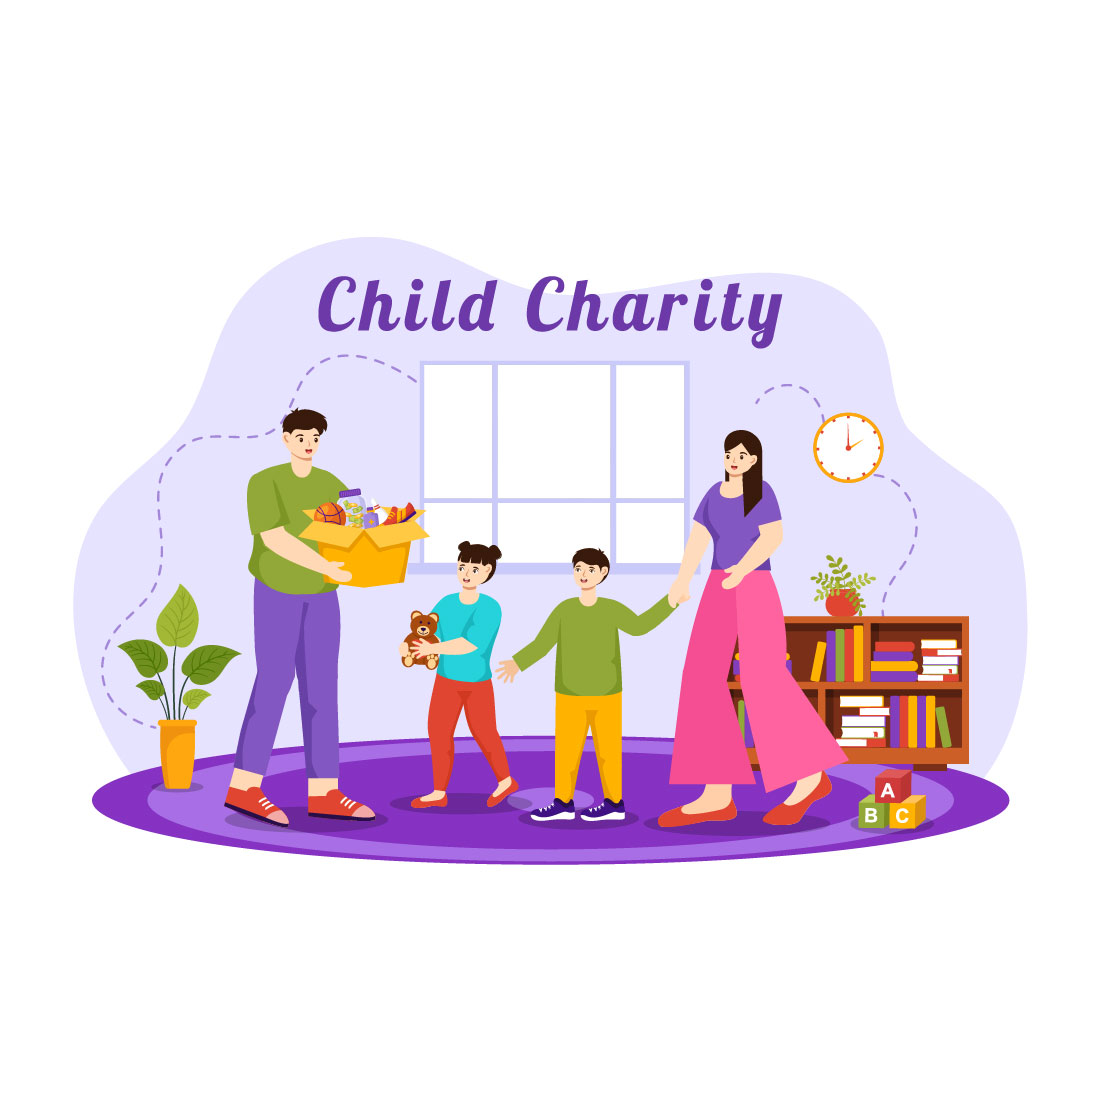 12 Child Charity Illustration cover image.